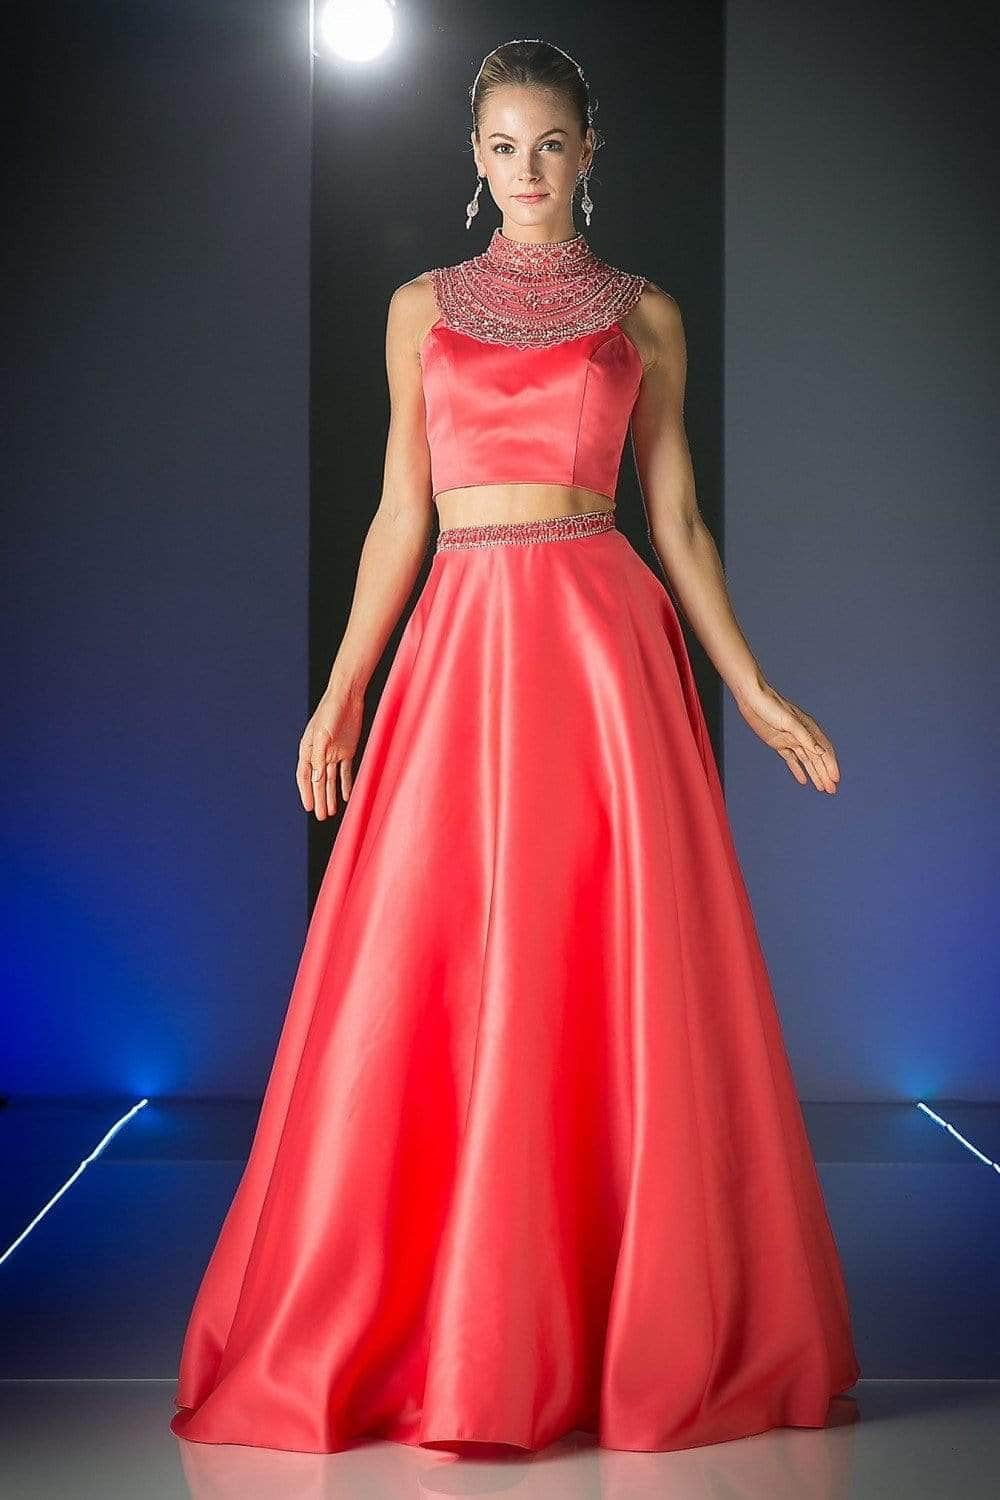 Ladivine CK67 Special Occasion Dress 2 / Coral